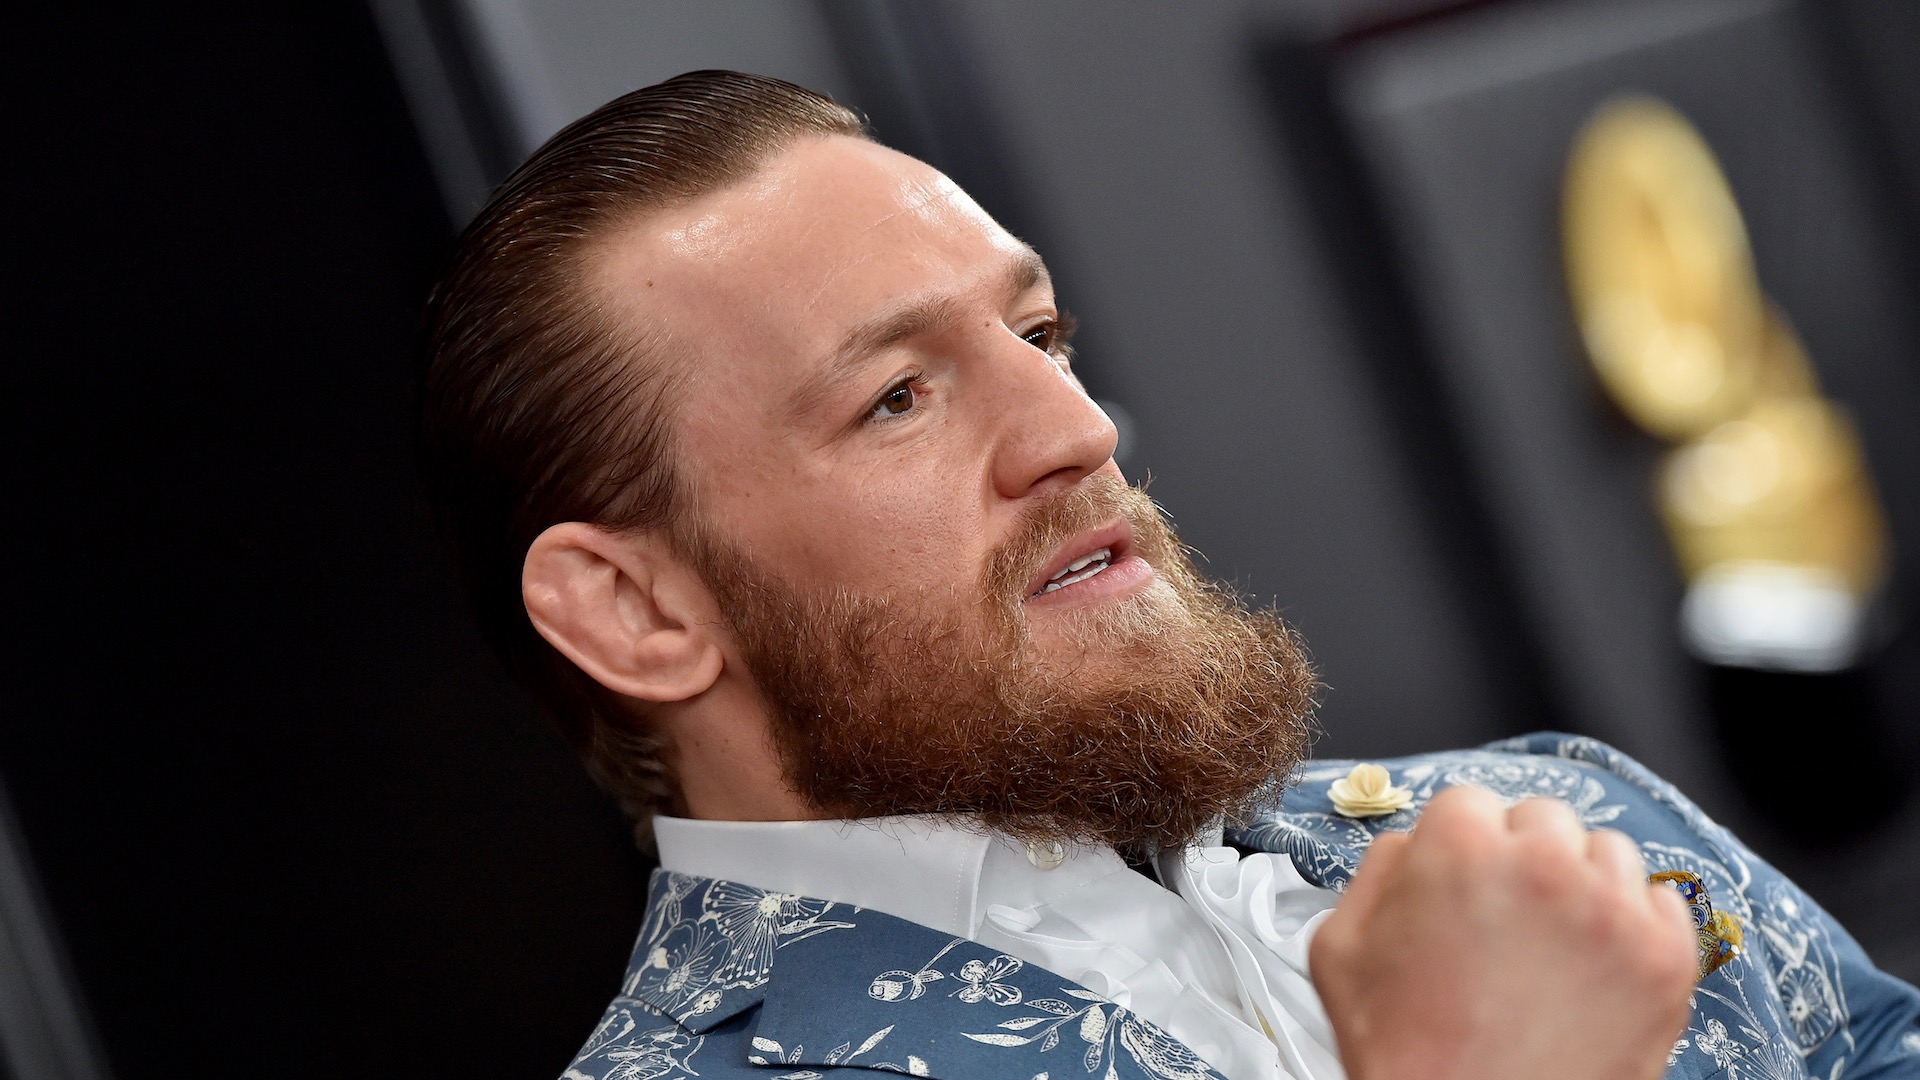 Conor McGregor's new watch: How much does it cost and what is the hidden  NSFW secret in it?